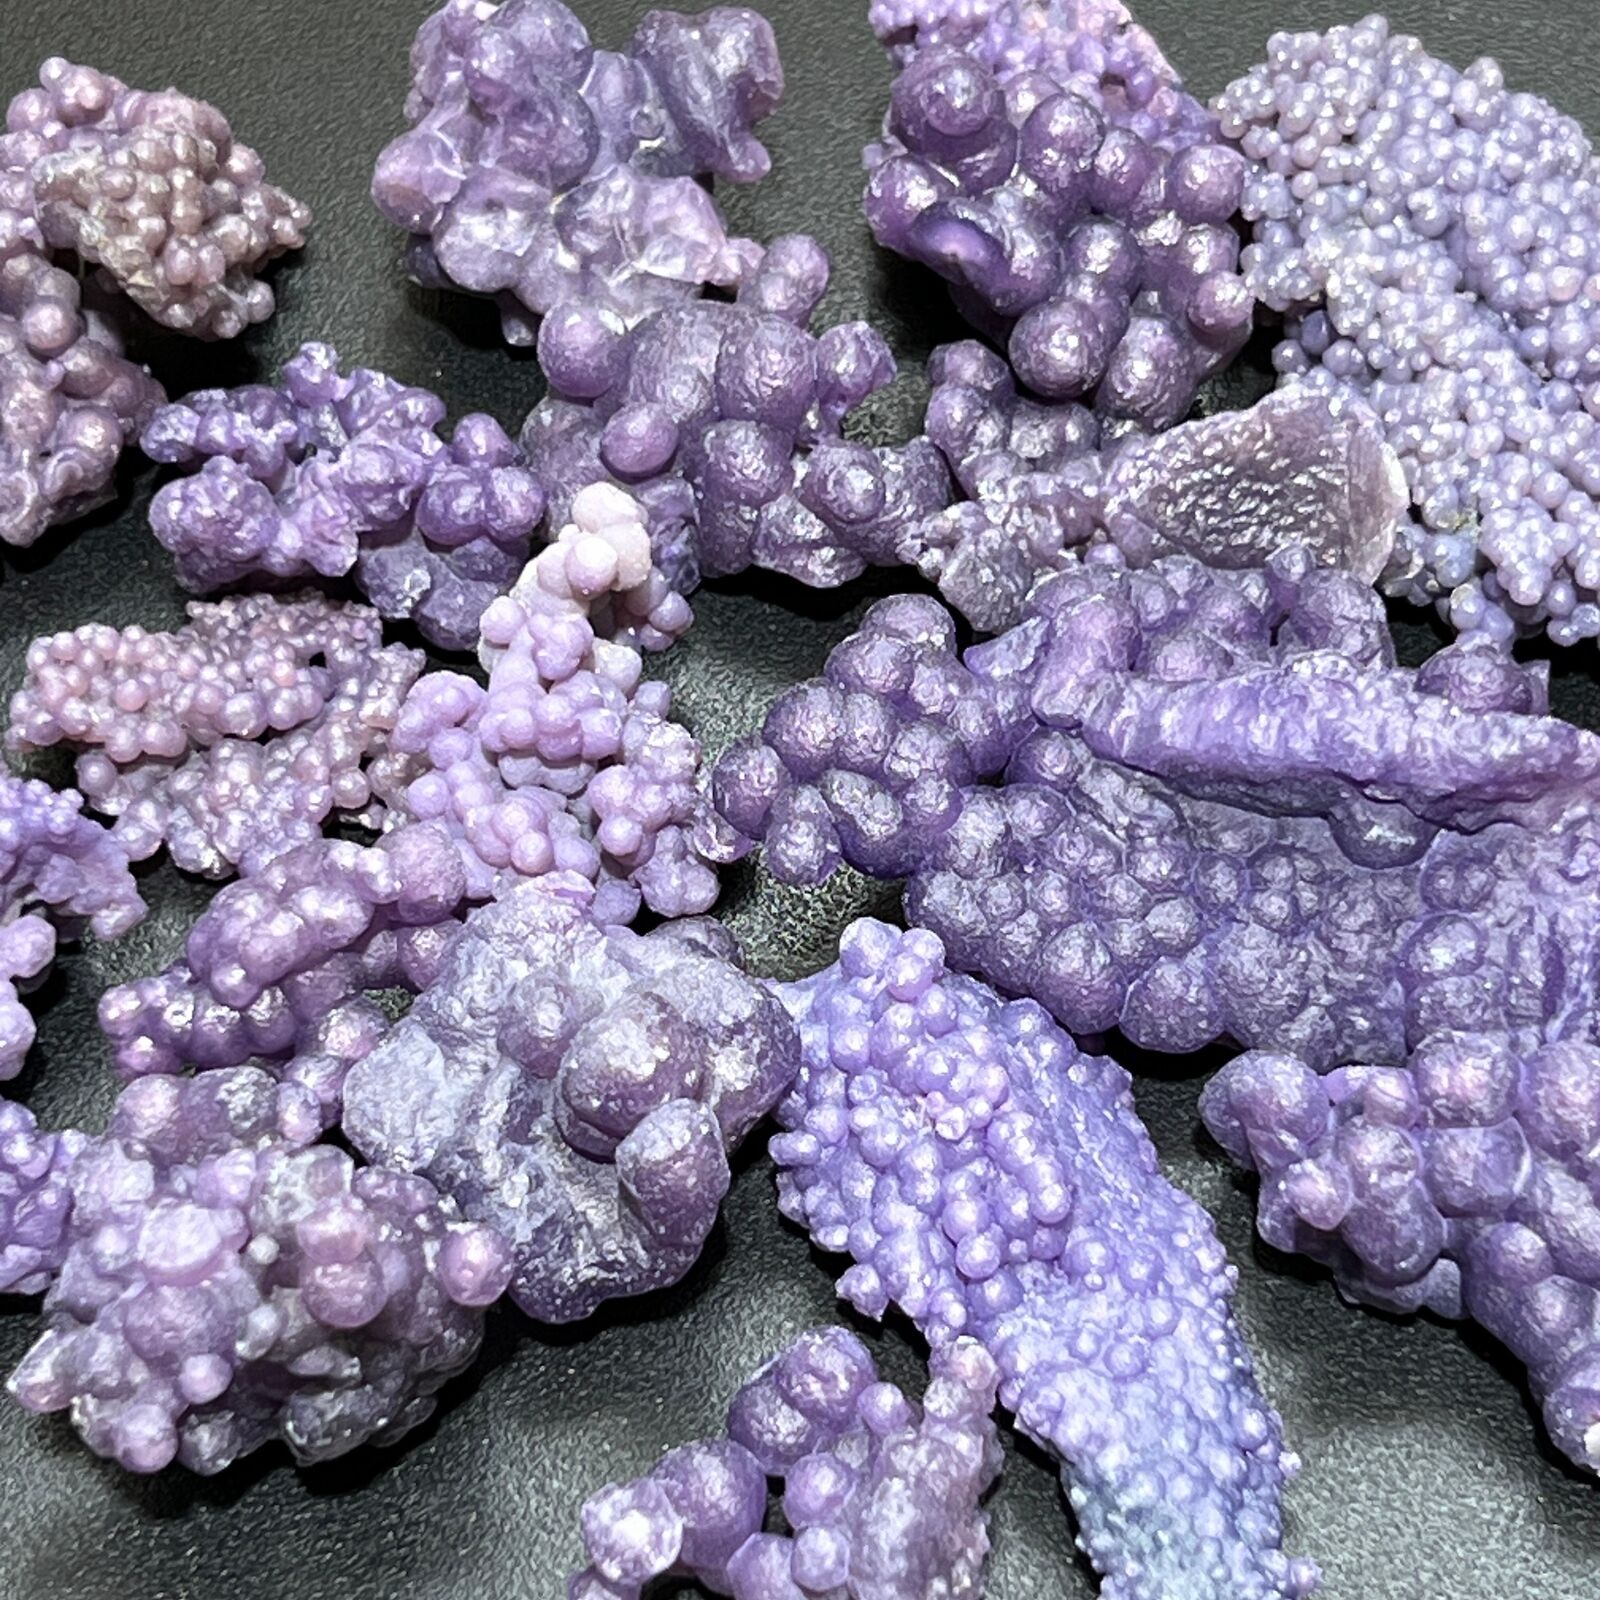 Grape Agate Crystal Clusters (1 LB) One Pound Wholesale Lot Natural Gemstones